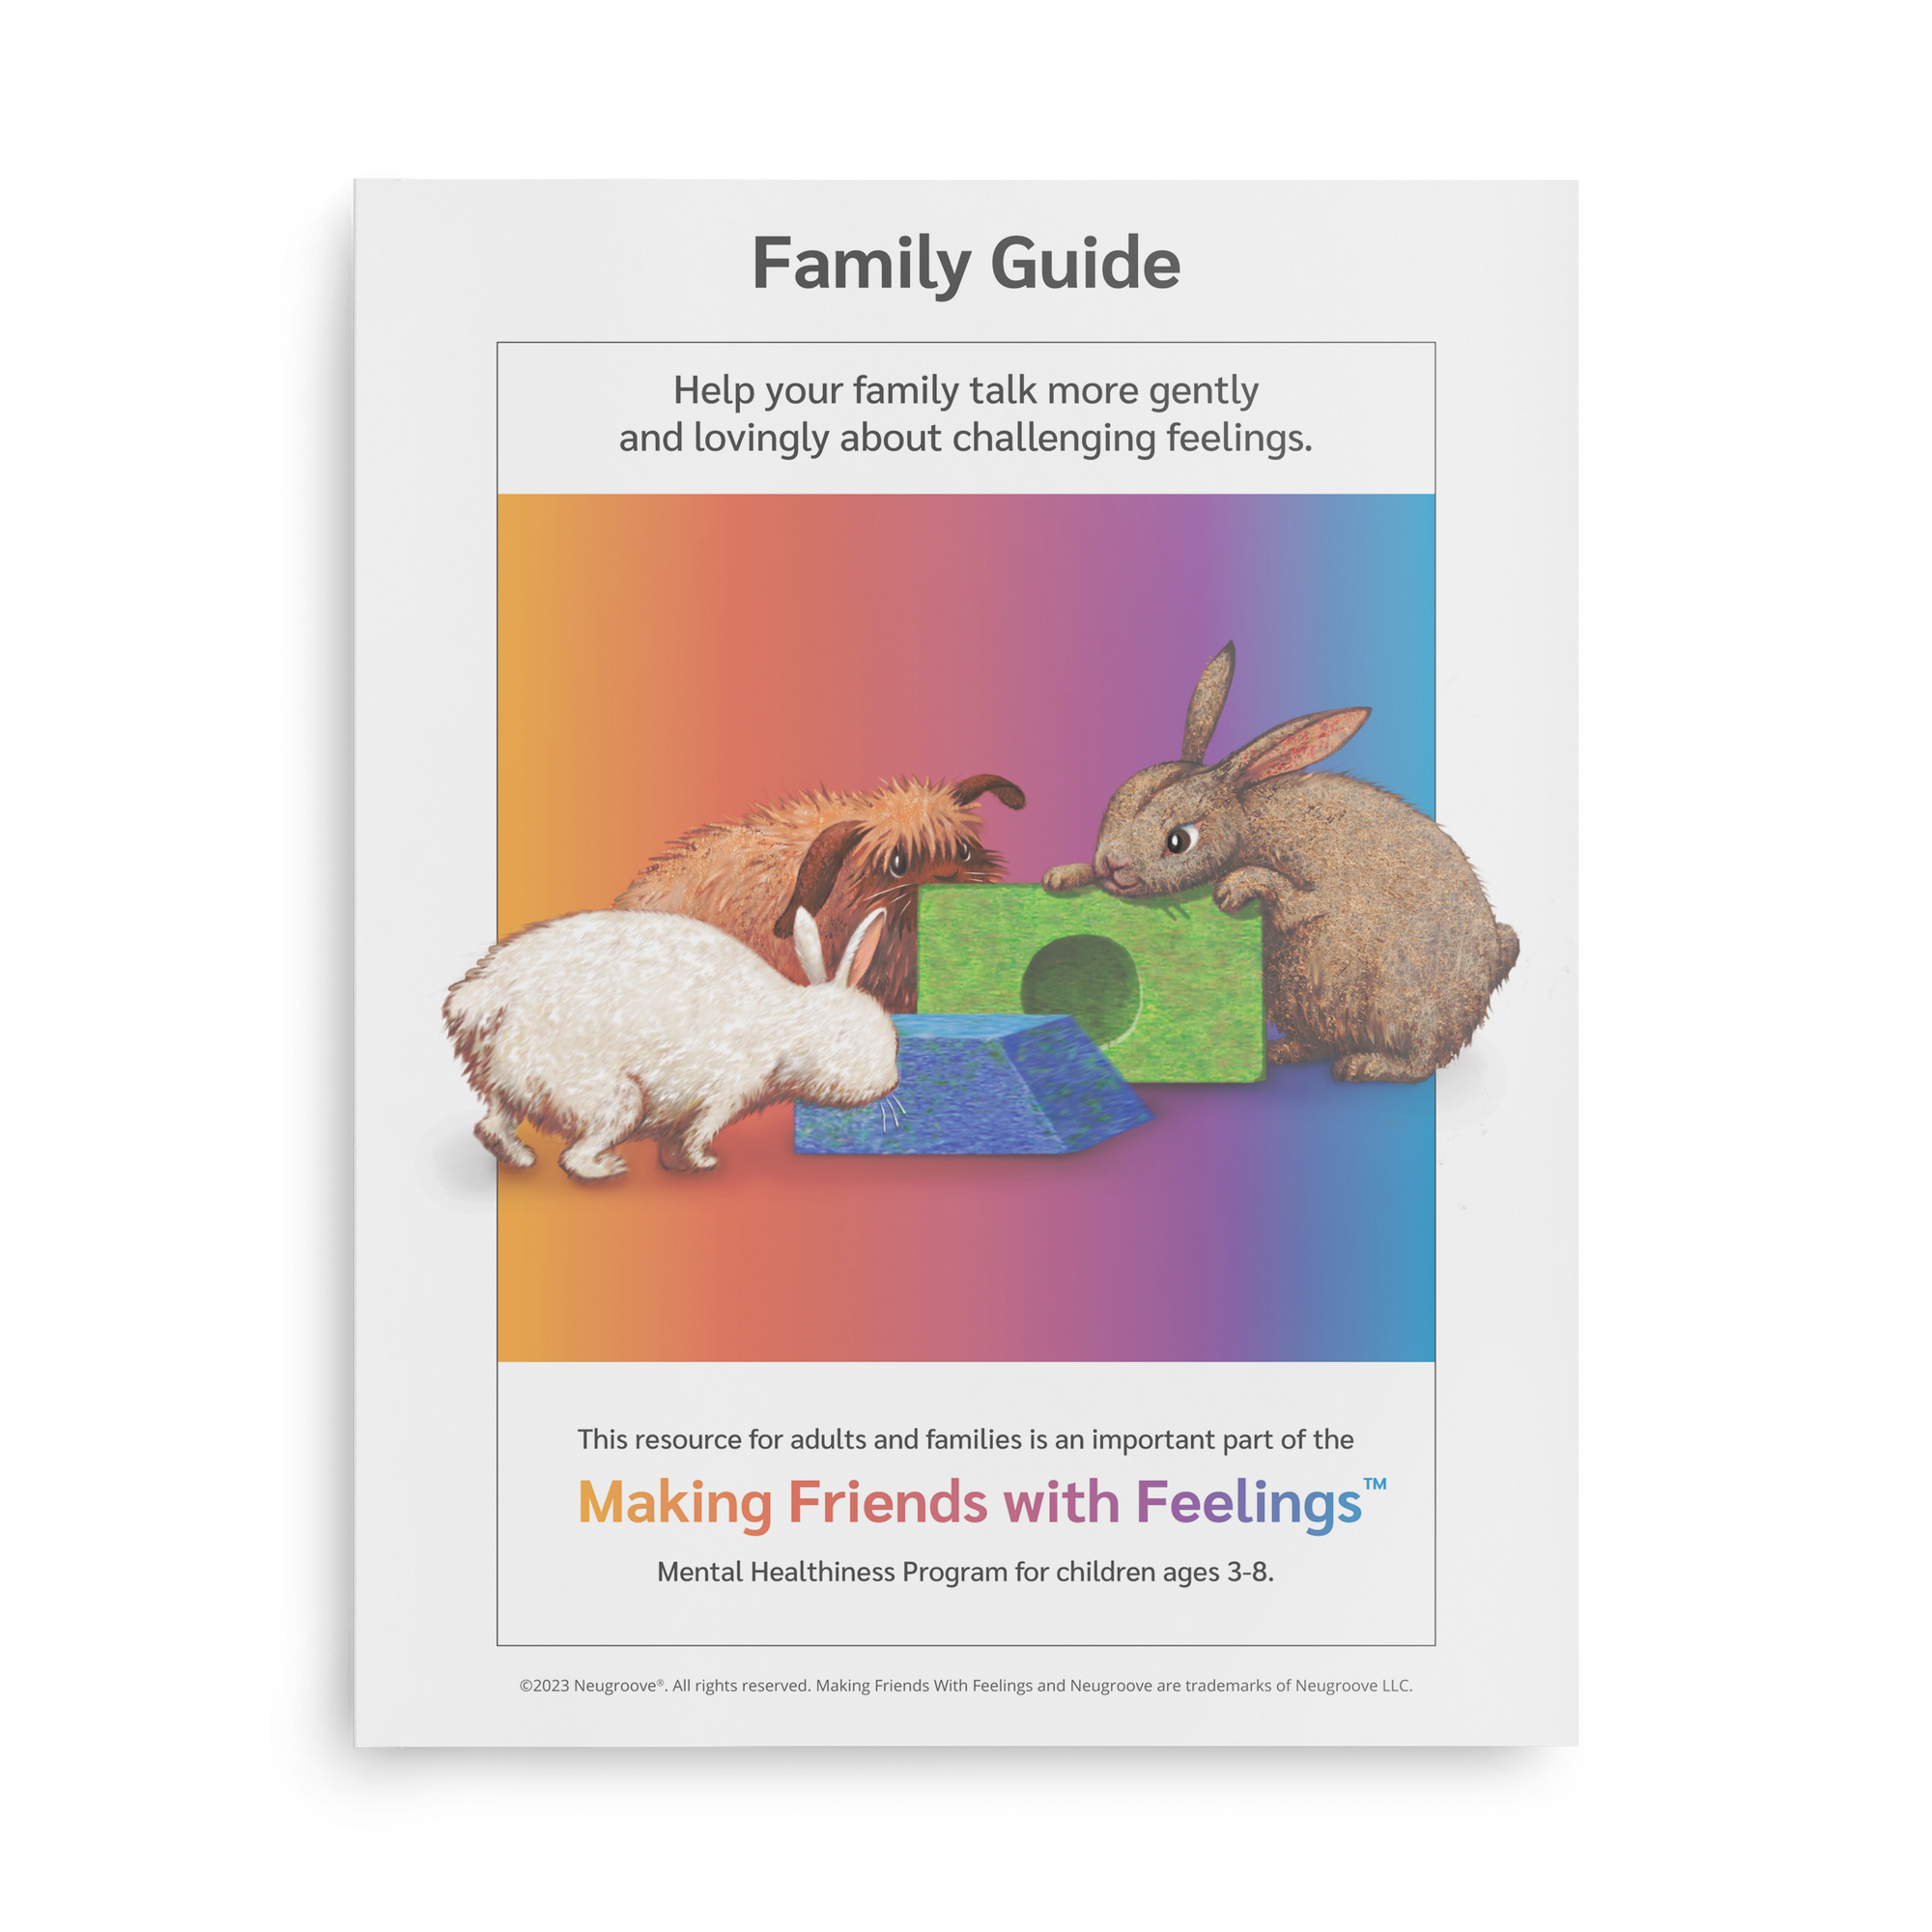 Family Guide to Making Friends with Feelings